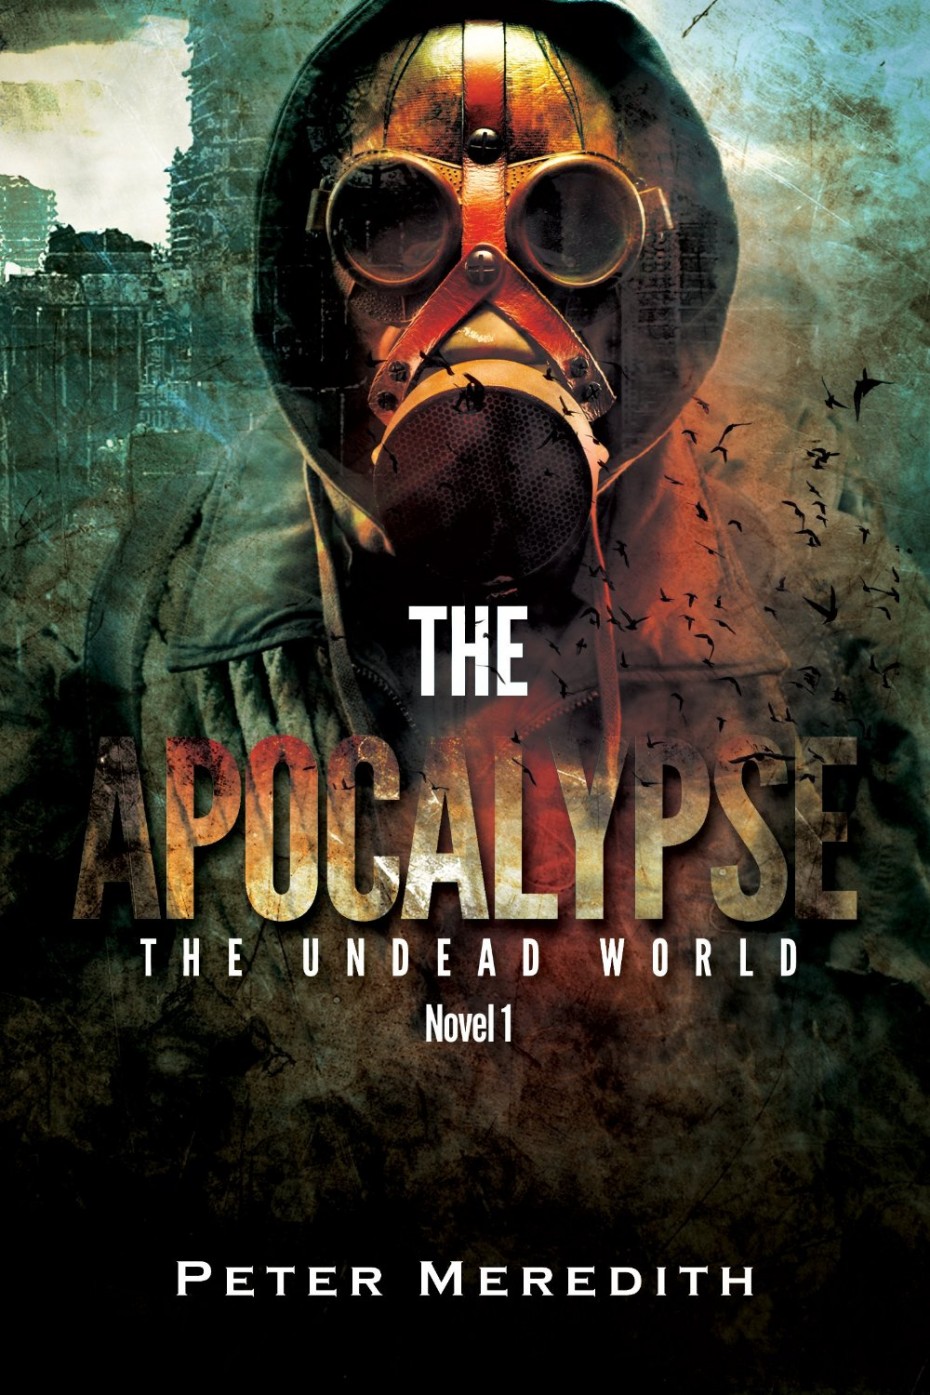 The Apocalypse (The Undead World Series Book 1)